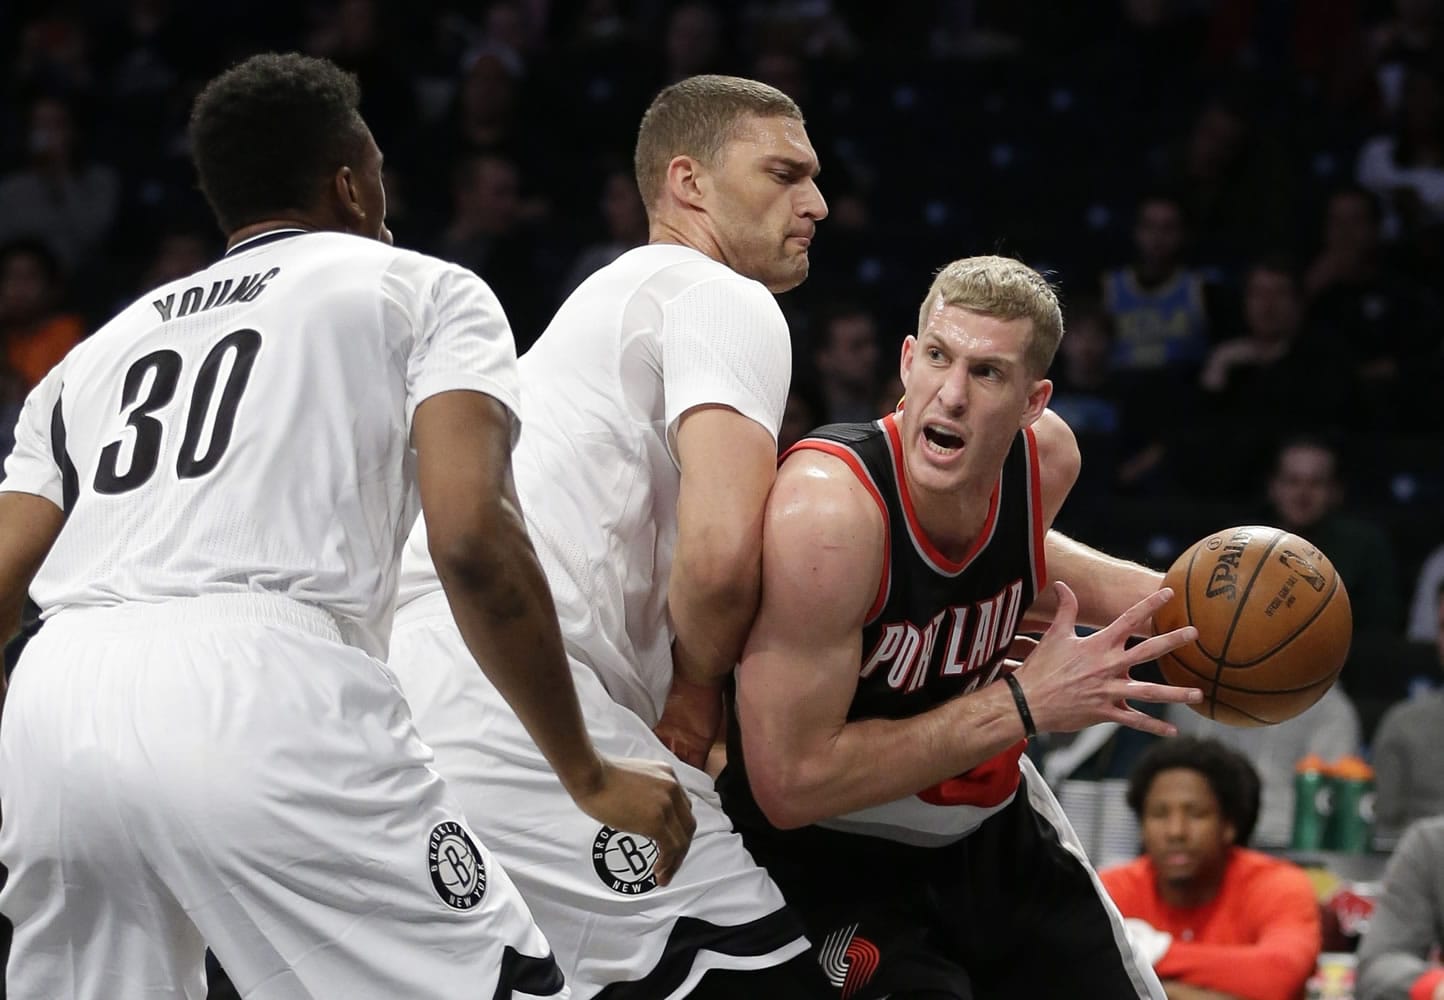 Brooklyn Nets' Brook Lopez, center, defends against Portland Trail Blazers' Mason Plumlee, right, as Nets' Thaddeus Young (30) watches during the first half of an NBA basketball game Friday, Jan. 15, 2016, in New York.